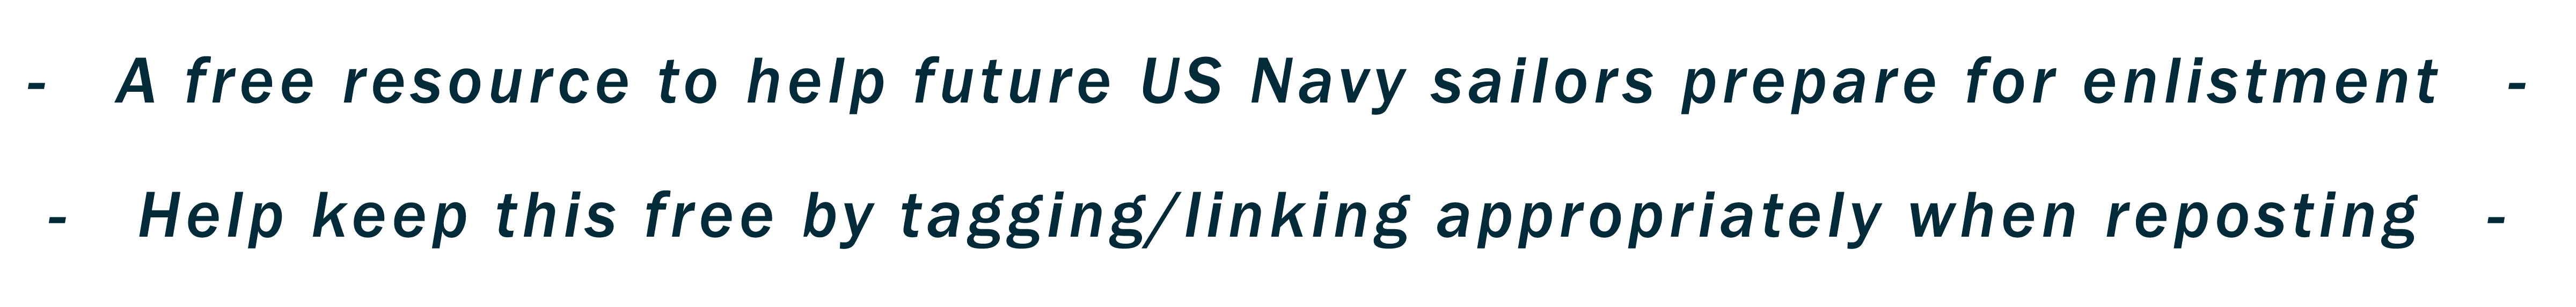 A free resource to help future US Navy sailors prepare for enlistment. Help keep this free by tagging/linking appropriately when reposting